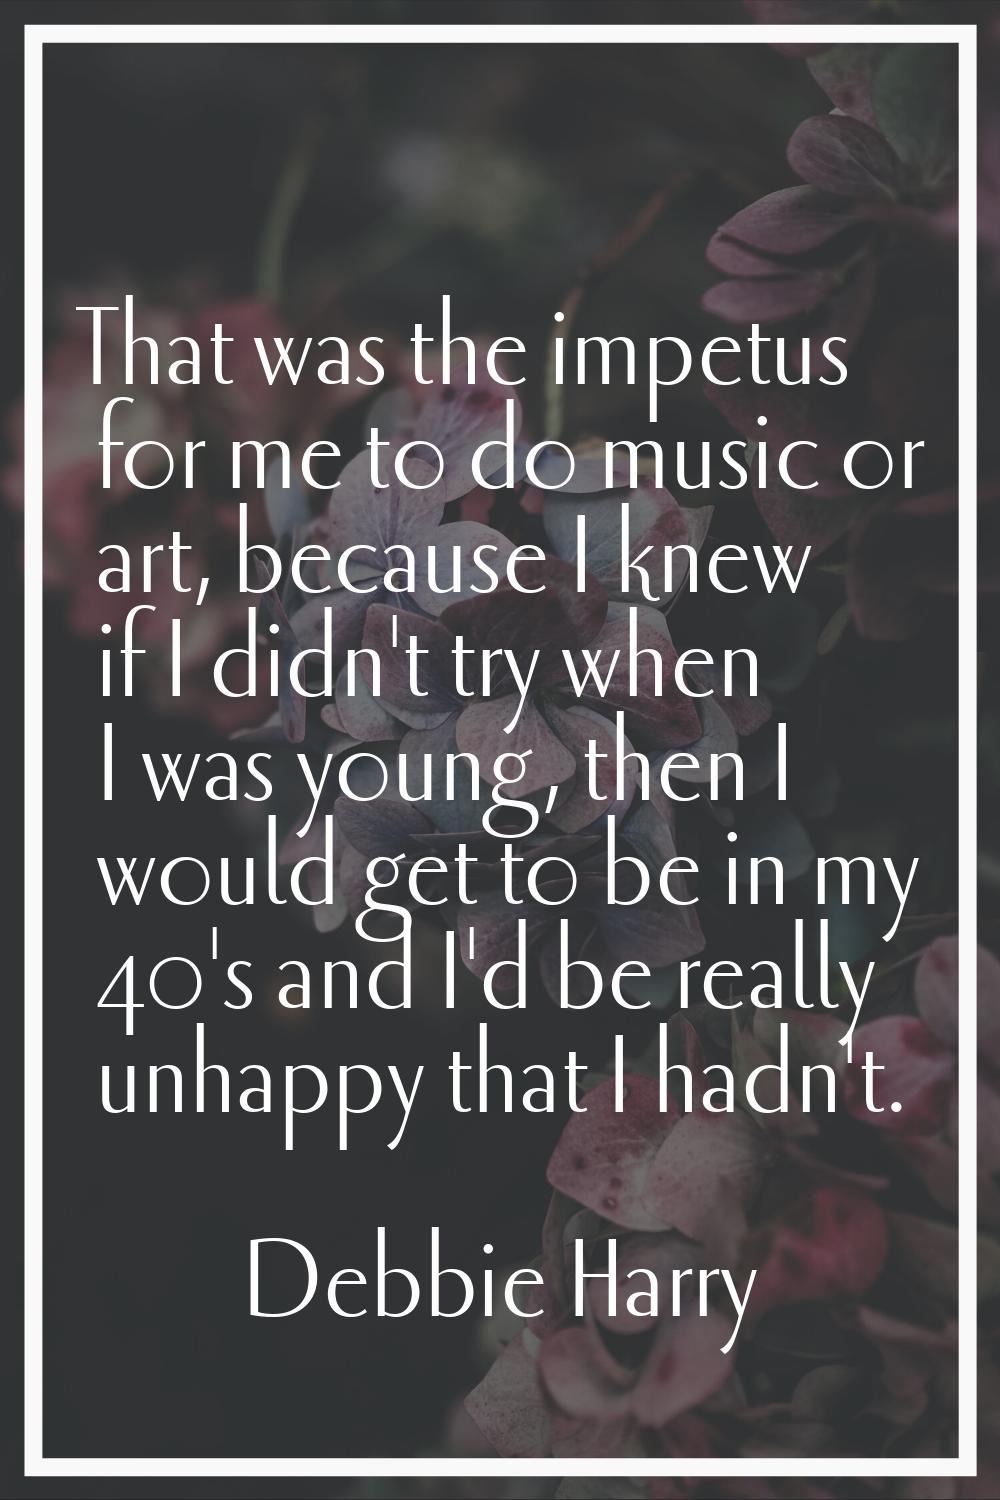 That was the impetus for me to do music or art, because I knew if I didn't try when I was young, th